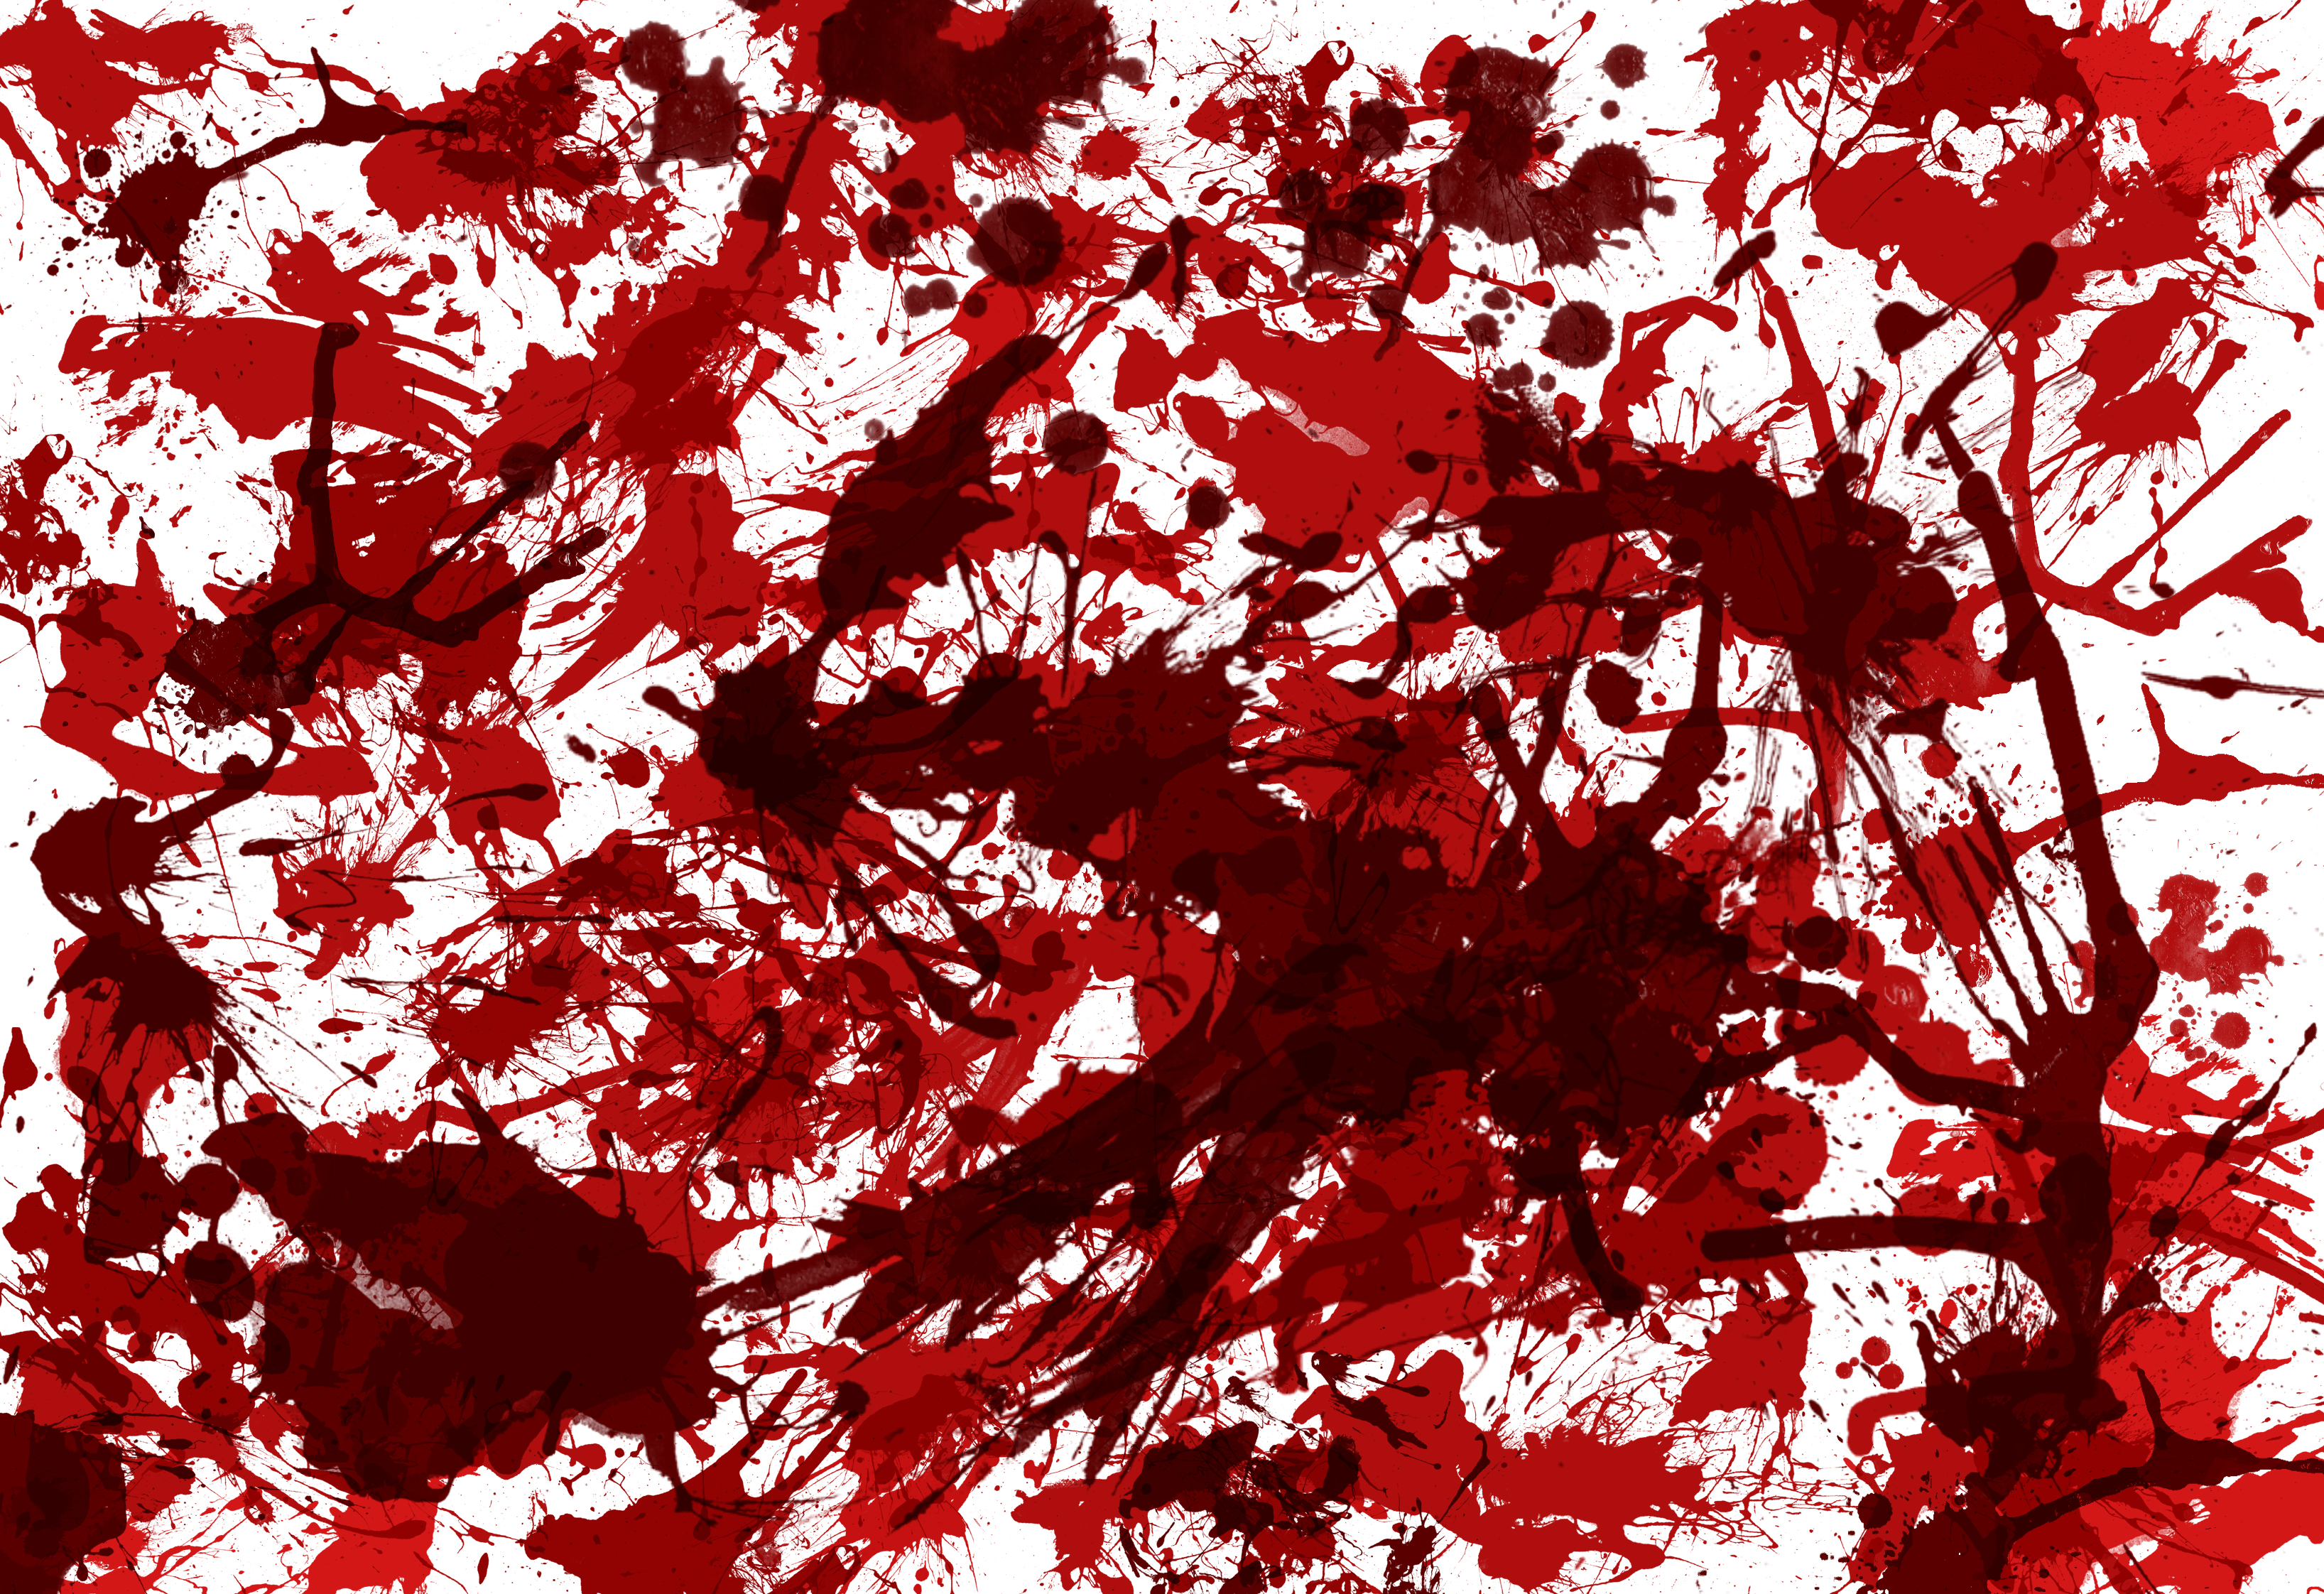 Free texture - Blood Splatter by smileys-4-eva on Clipart library